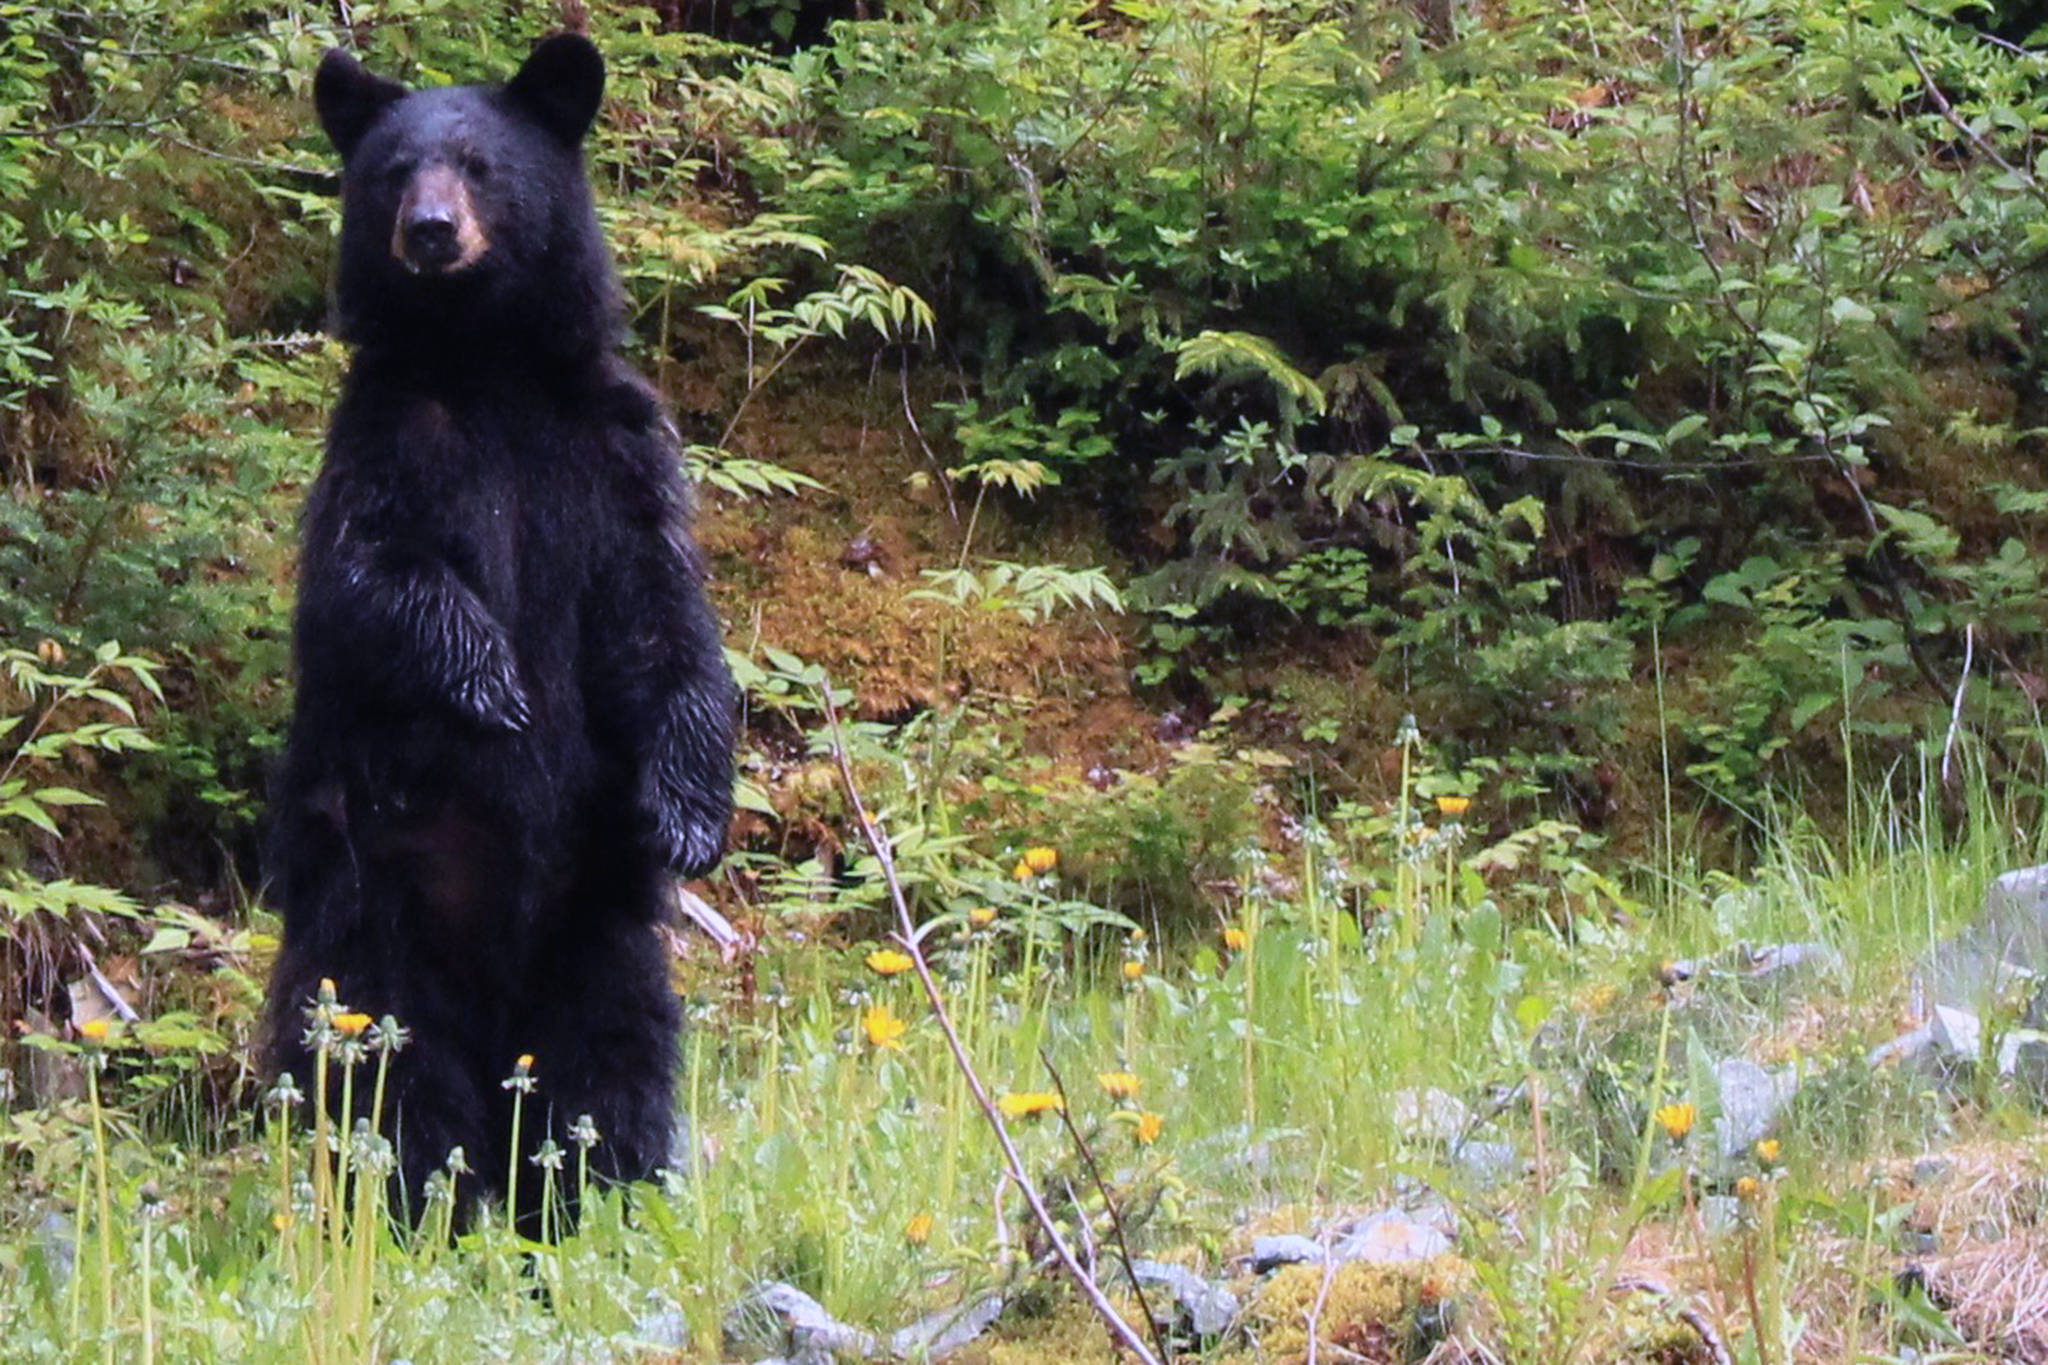 Encounters with bears like this one near the Shrine of St. Therese are on track for a normal year right now, but the berry and salmon seasons are too early to call right now, say biologists. (Dana Zigmund / Juneau Empire)